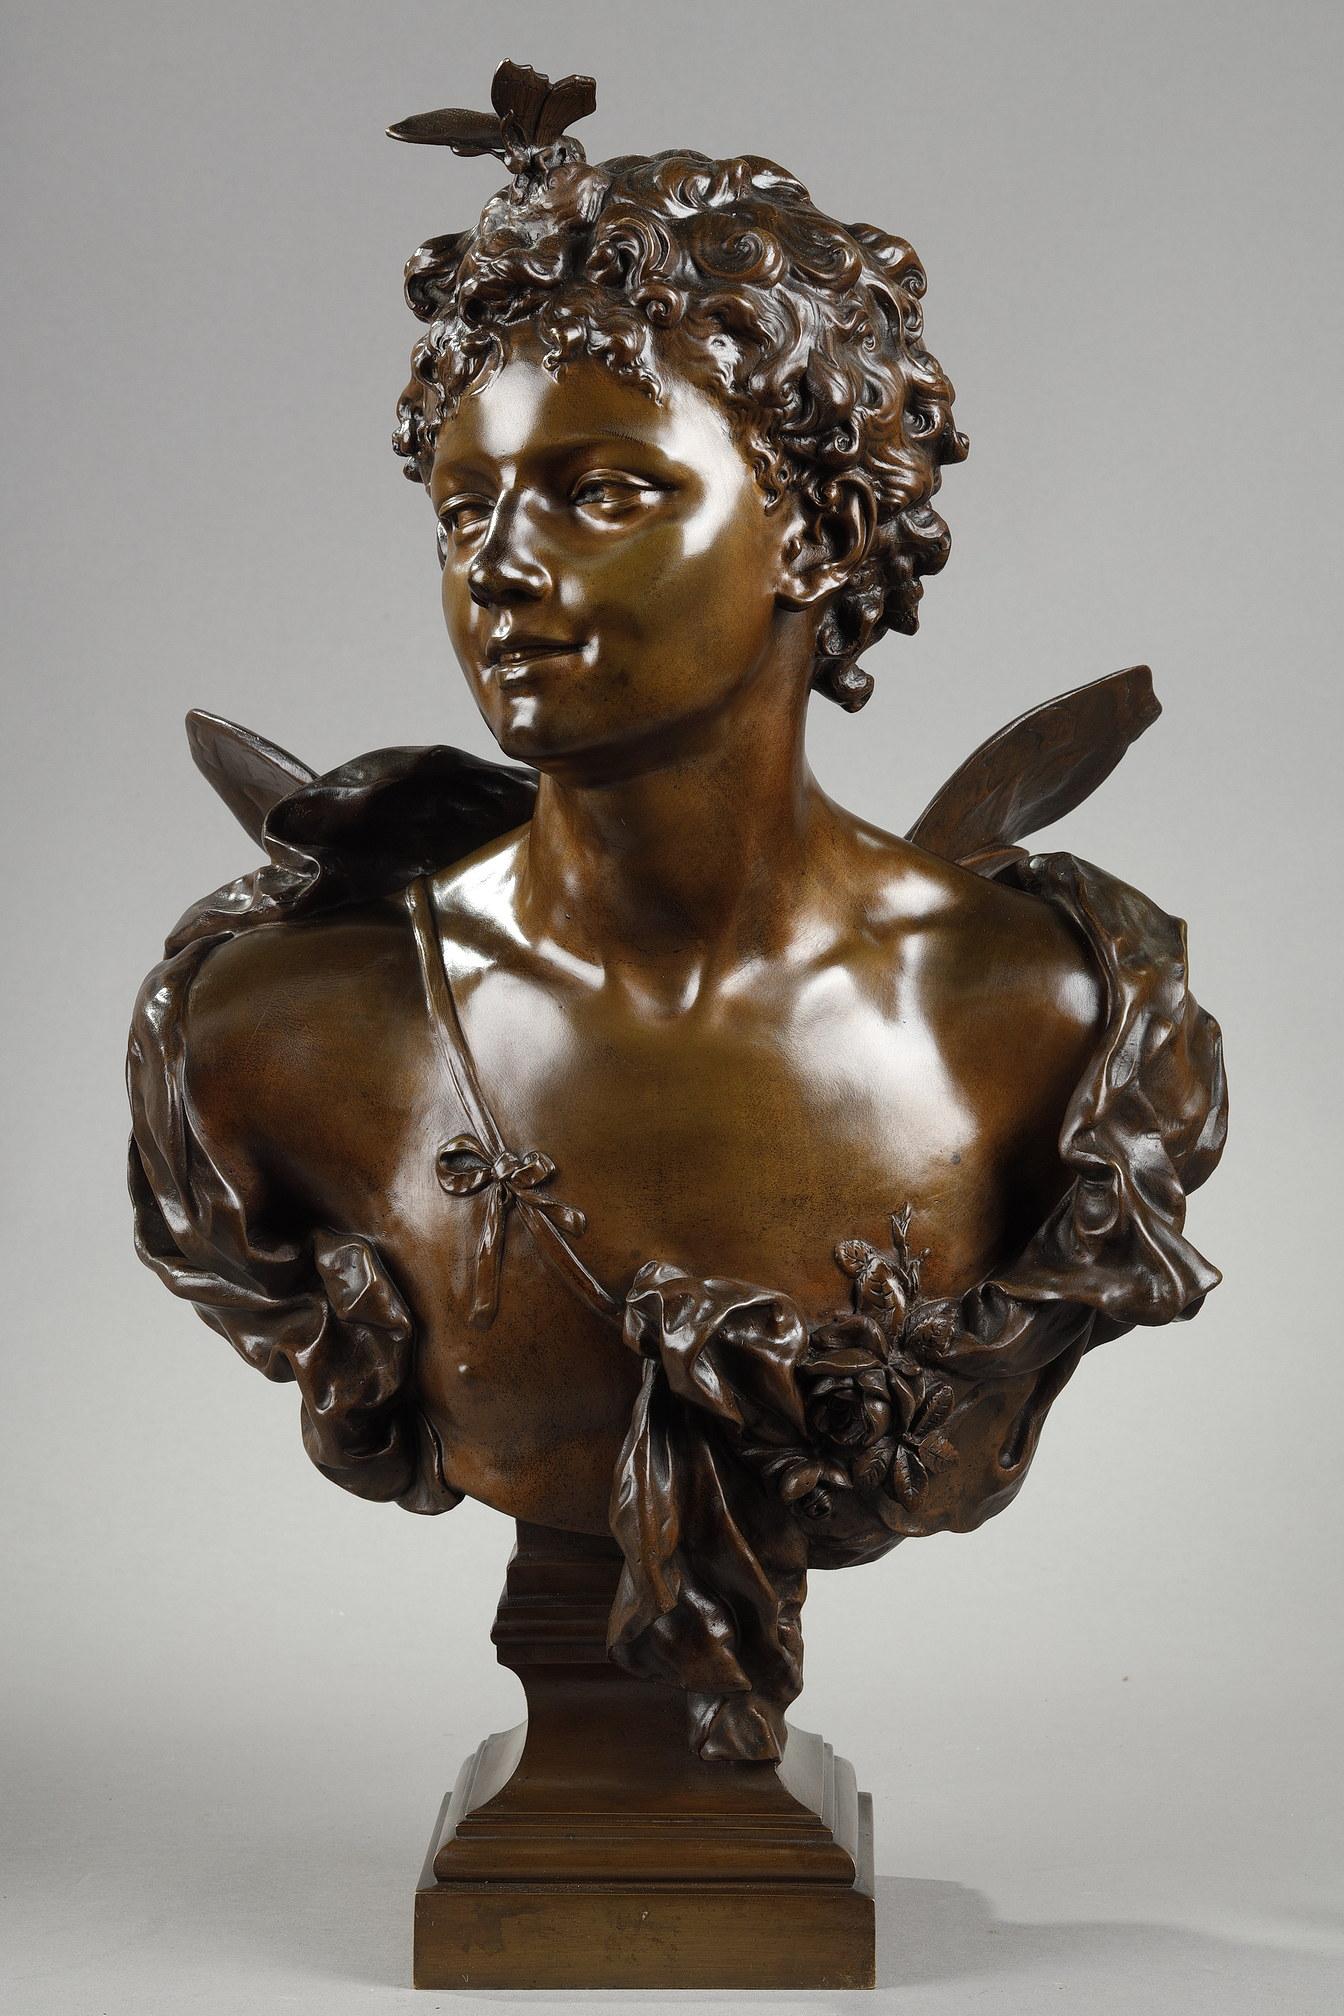 Bronze bust with a medal patina representing a young man with a childish look and butterfly wings. He is wearing a drape held by a knot on his chest. His bodice is decorated with a rose. In his curly hair is a butterfly. It is Zephyrus, god of the